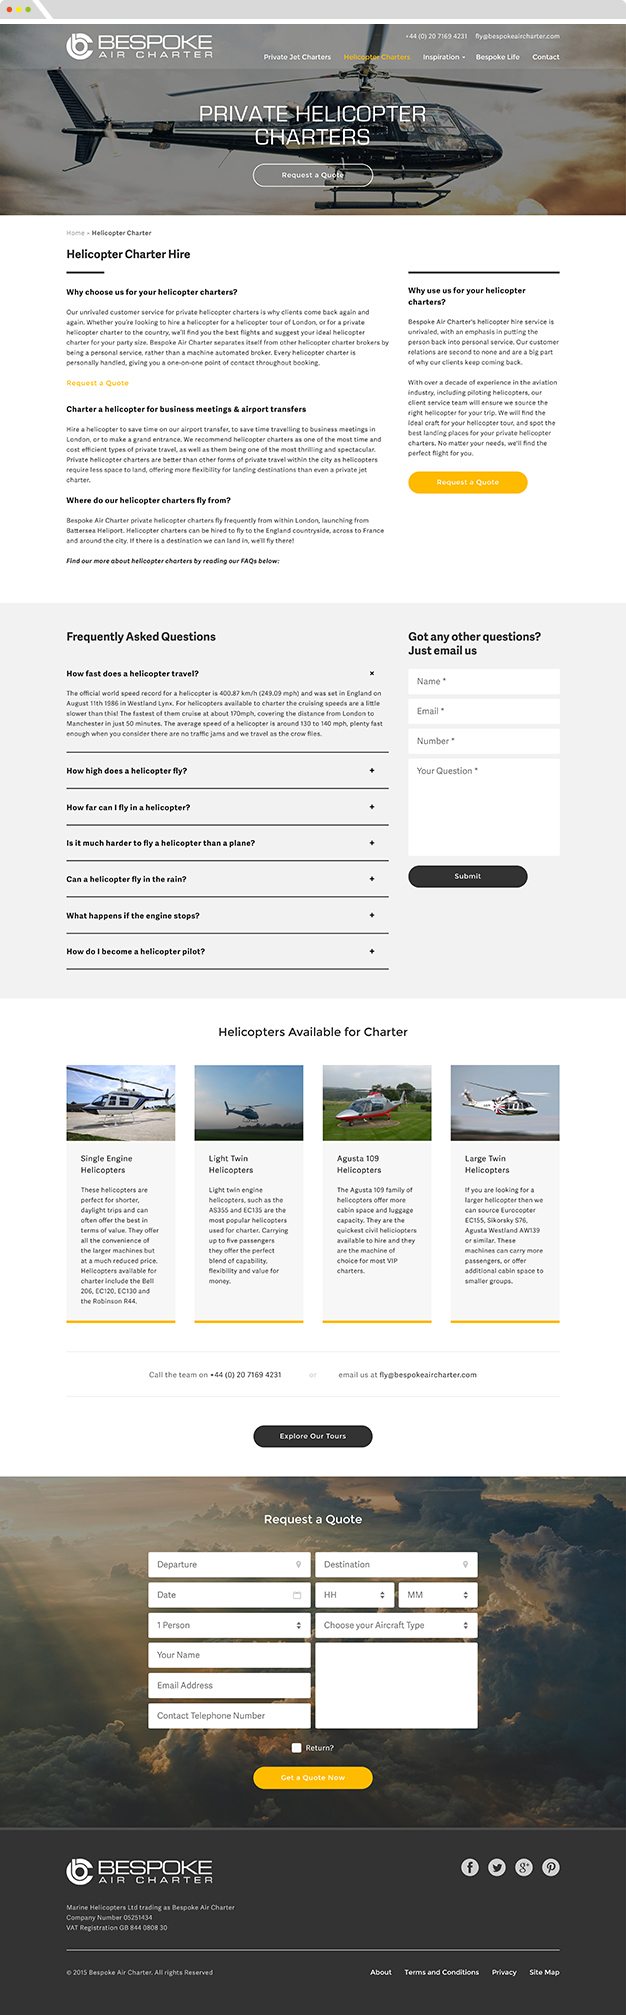 bespoke-air-charter-helicopter